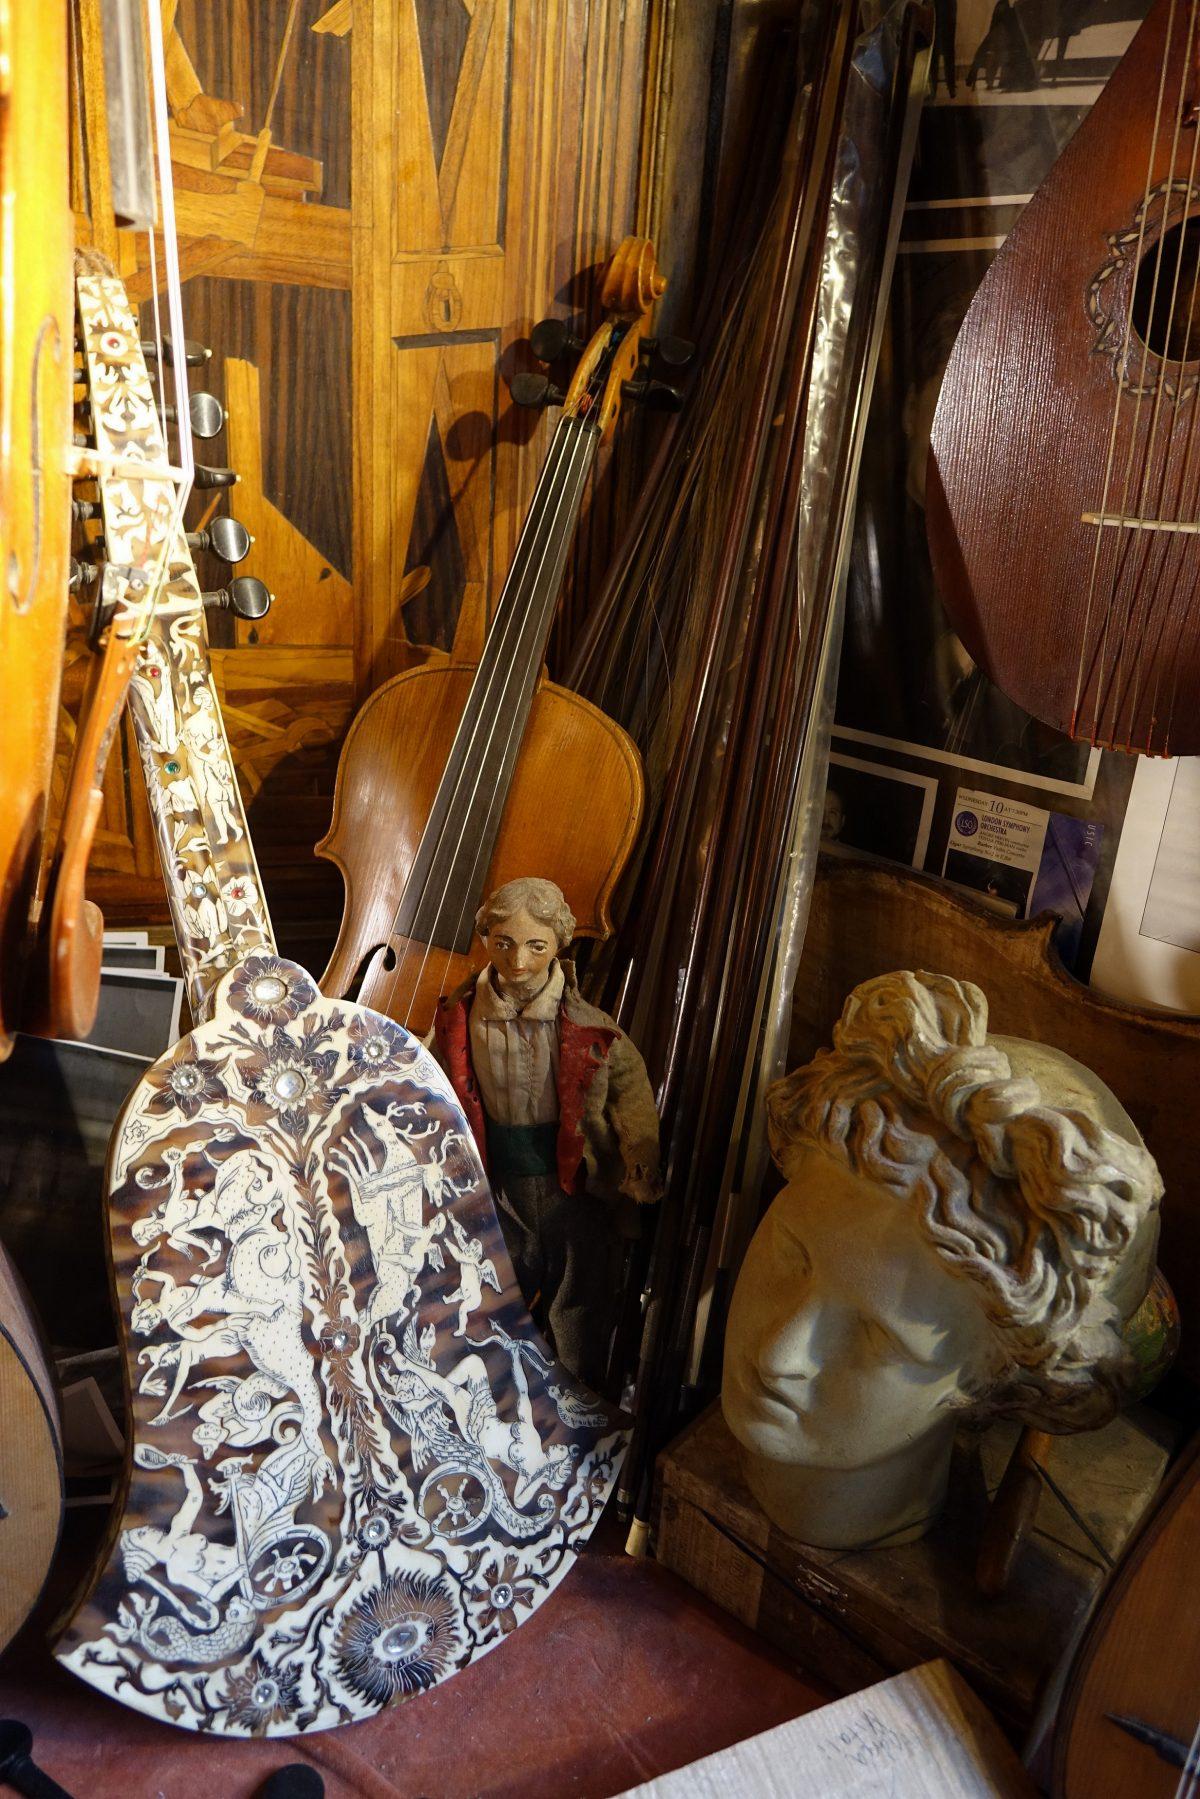 A selection of Jamie Lazzara's traditional handmade and restored stringed instruments in the window of her workshop in Florence, Italy. (Paolo Boni)